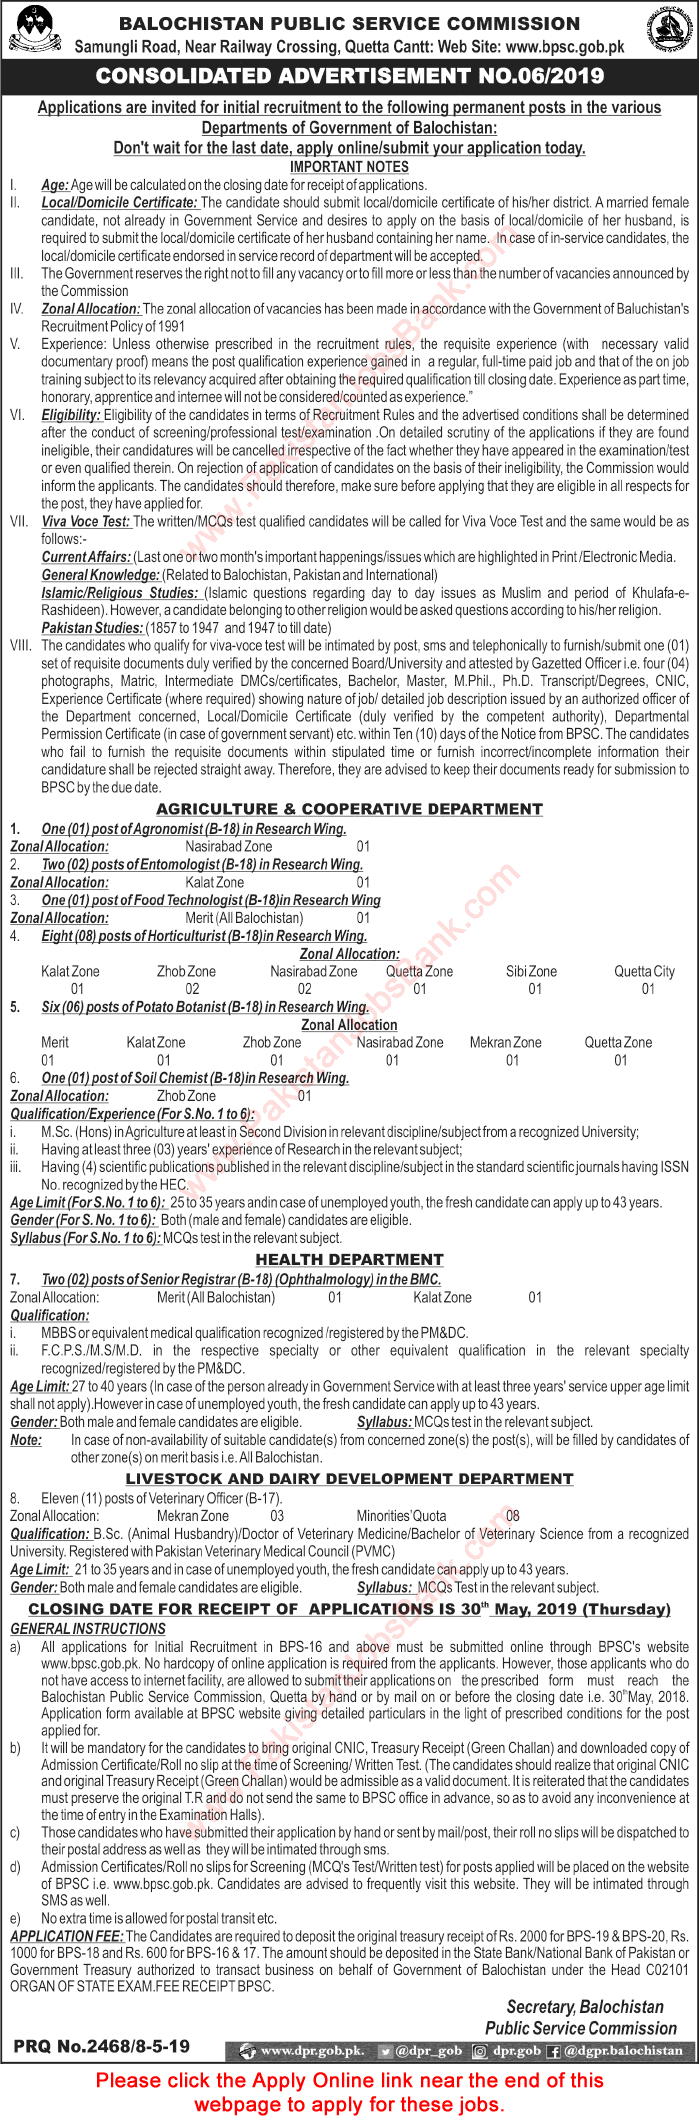 BPSC Jobs May 2019 Apply Online Consolidated Advertisement No 06/2019 6/2019 Latest